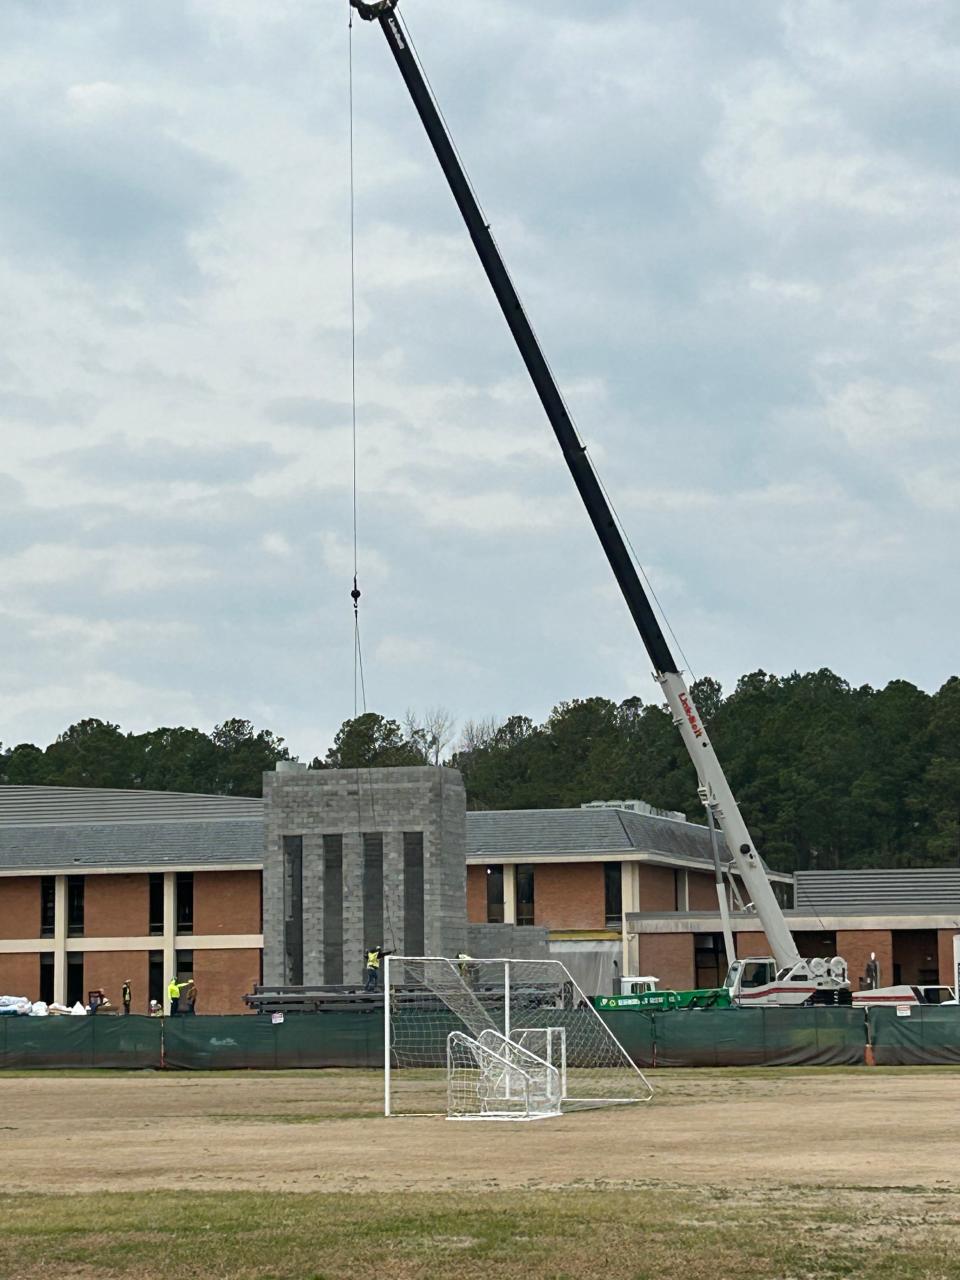 Construction is well under way on the $20.2 million technical and development center that DroneUp LLC of Virginia Beach is putting on the Dinwiddie County side of the Richard Bland College campus.